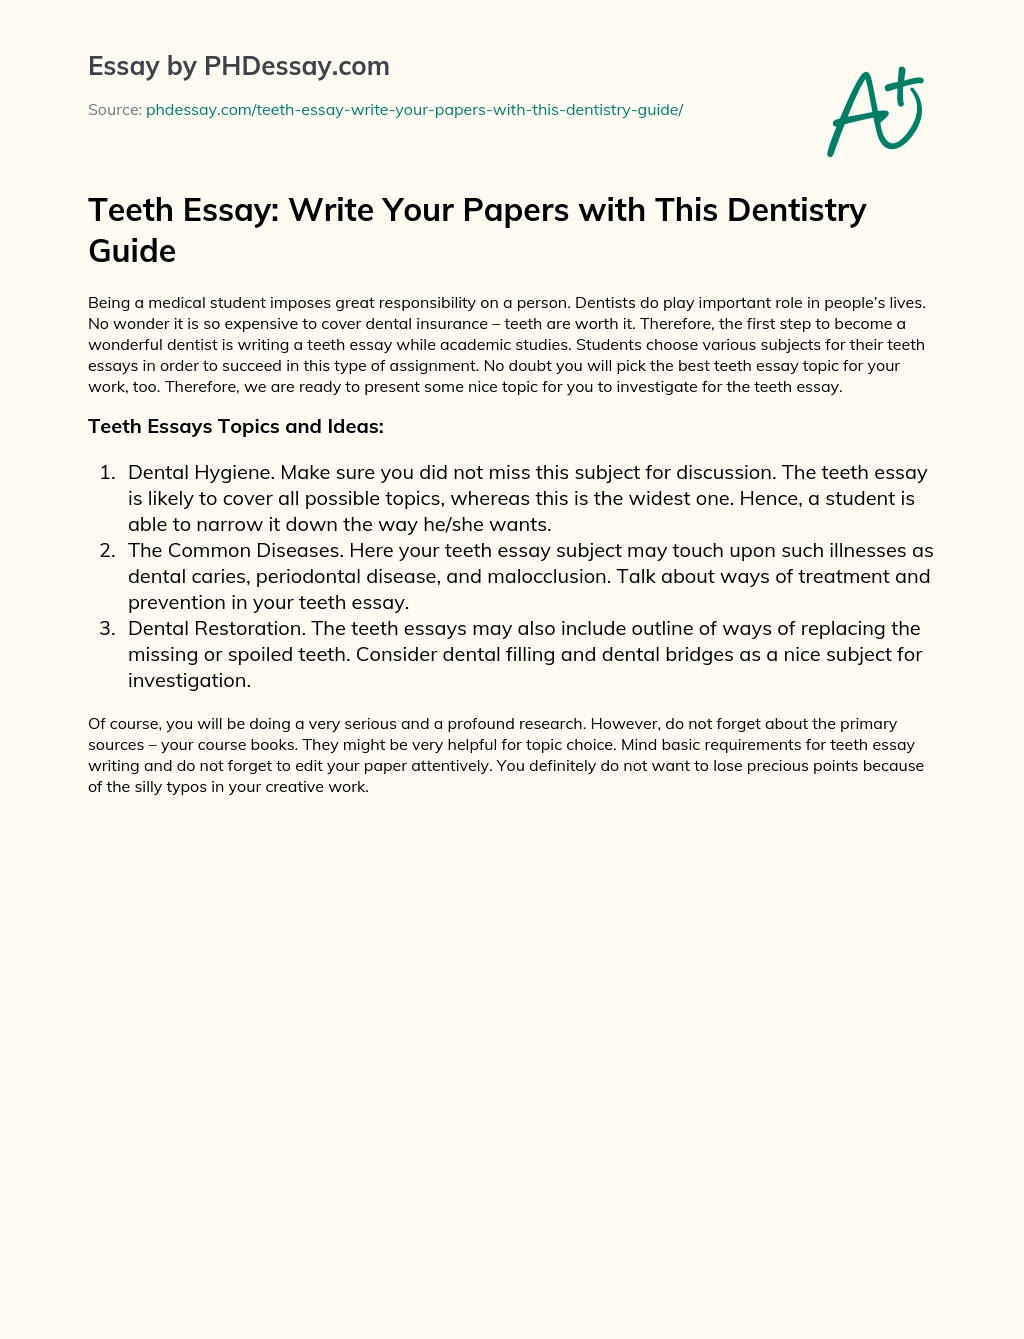 Teeth Essay: Write Your Papers with This Dentistry Guide essay